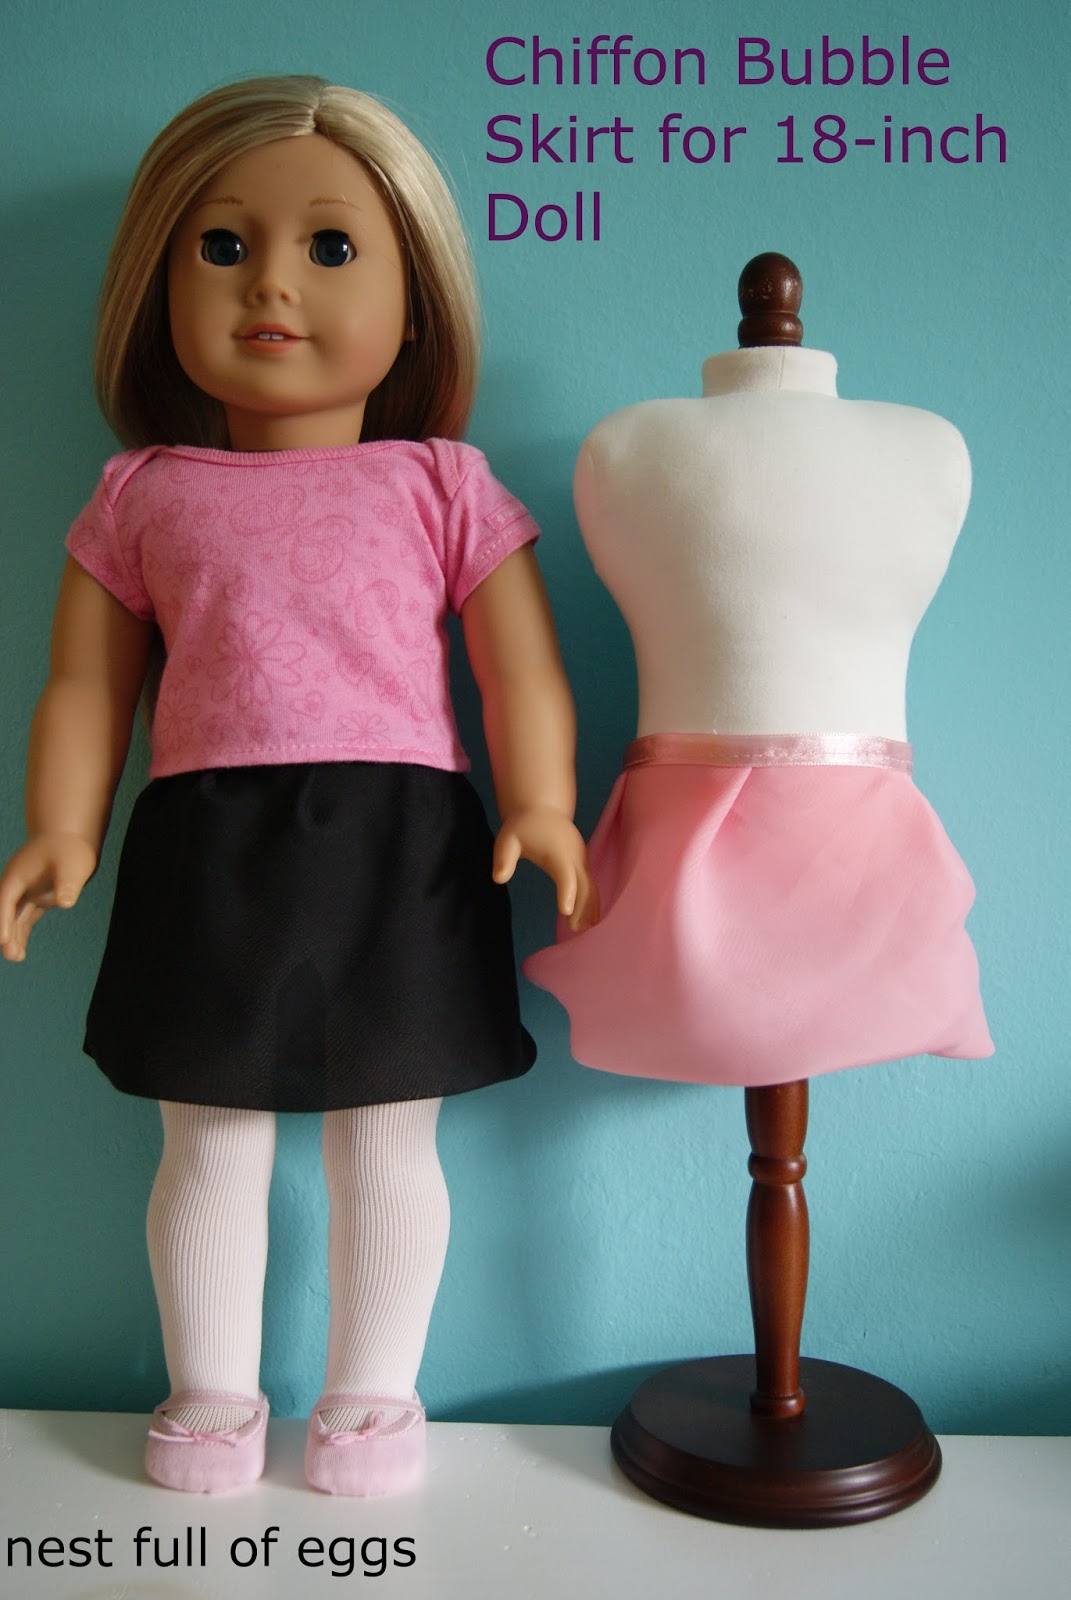 Chiffon bubble skirt for 18-inch doll by nest full of eggs